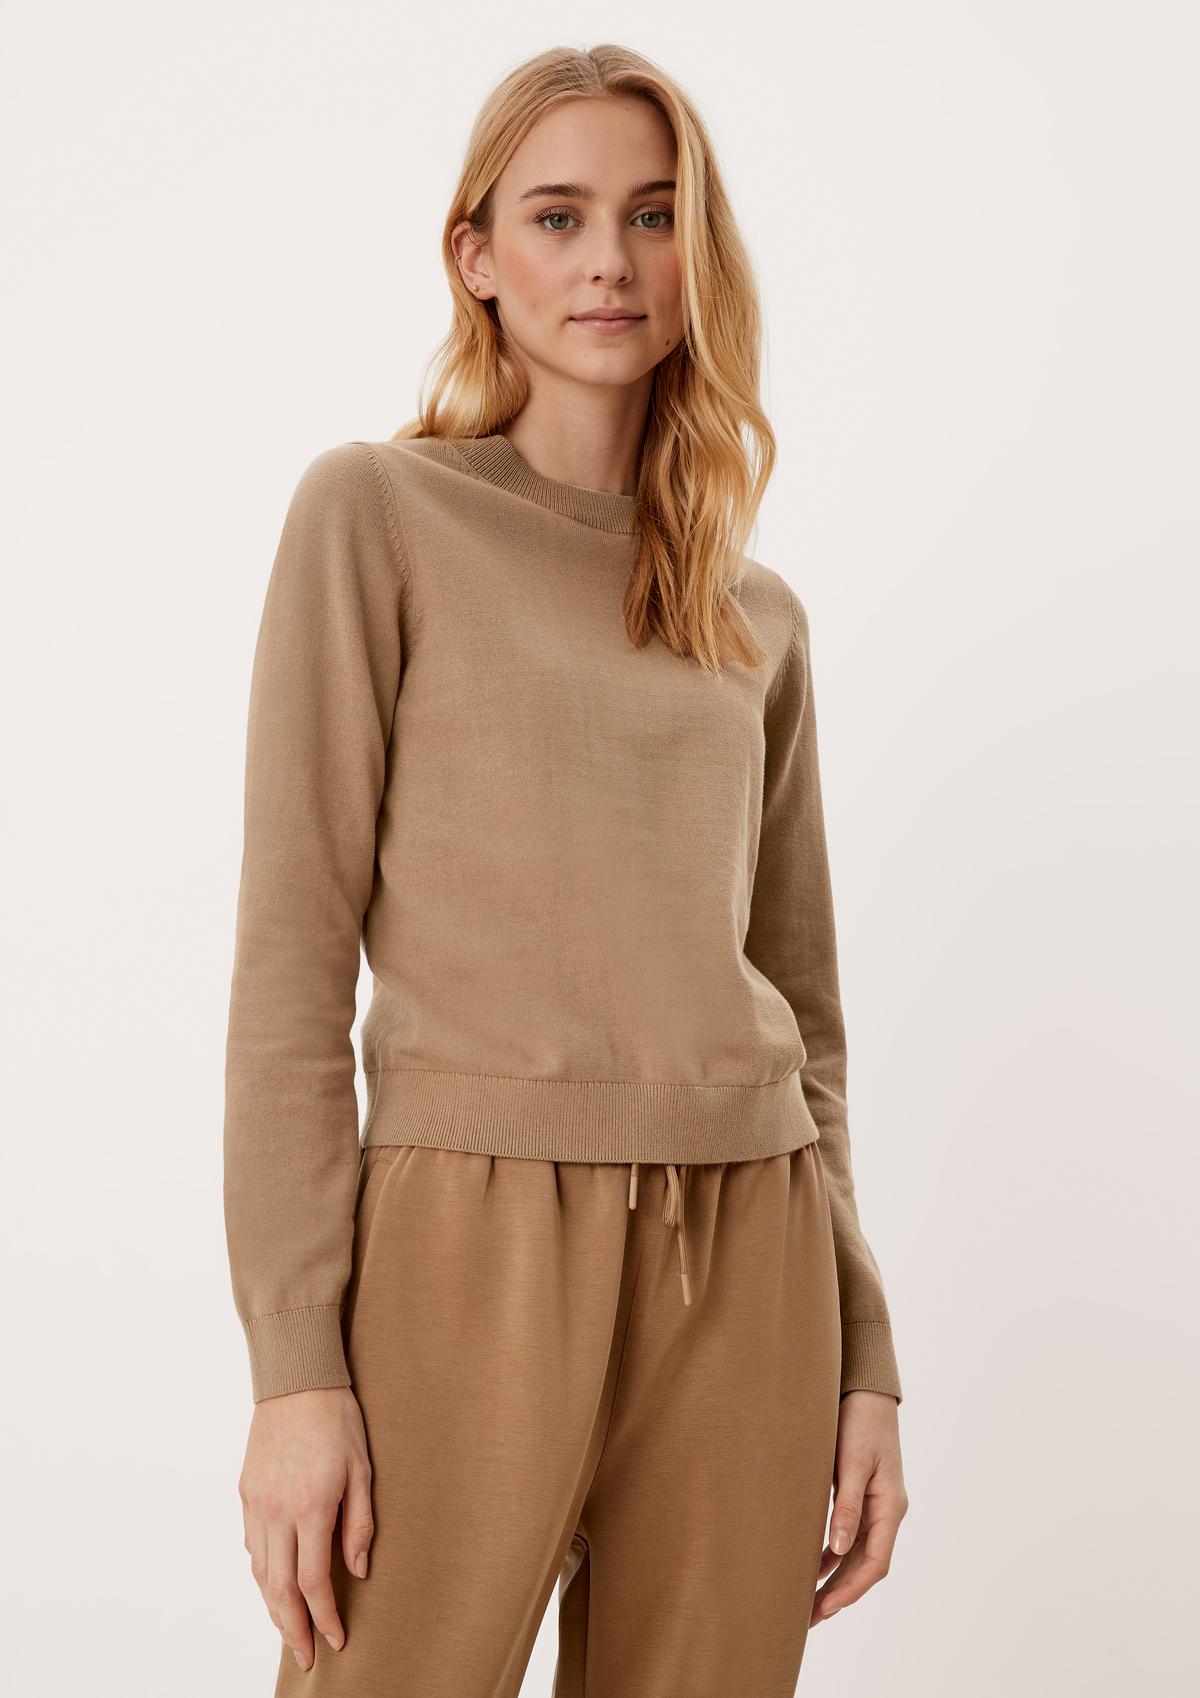 s.Oliver Cotton jumper with rib knit cuffs, collar and hem